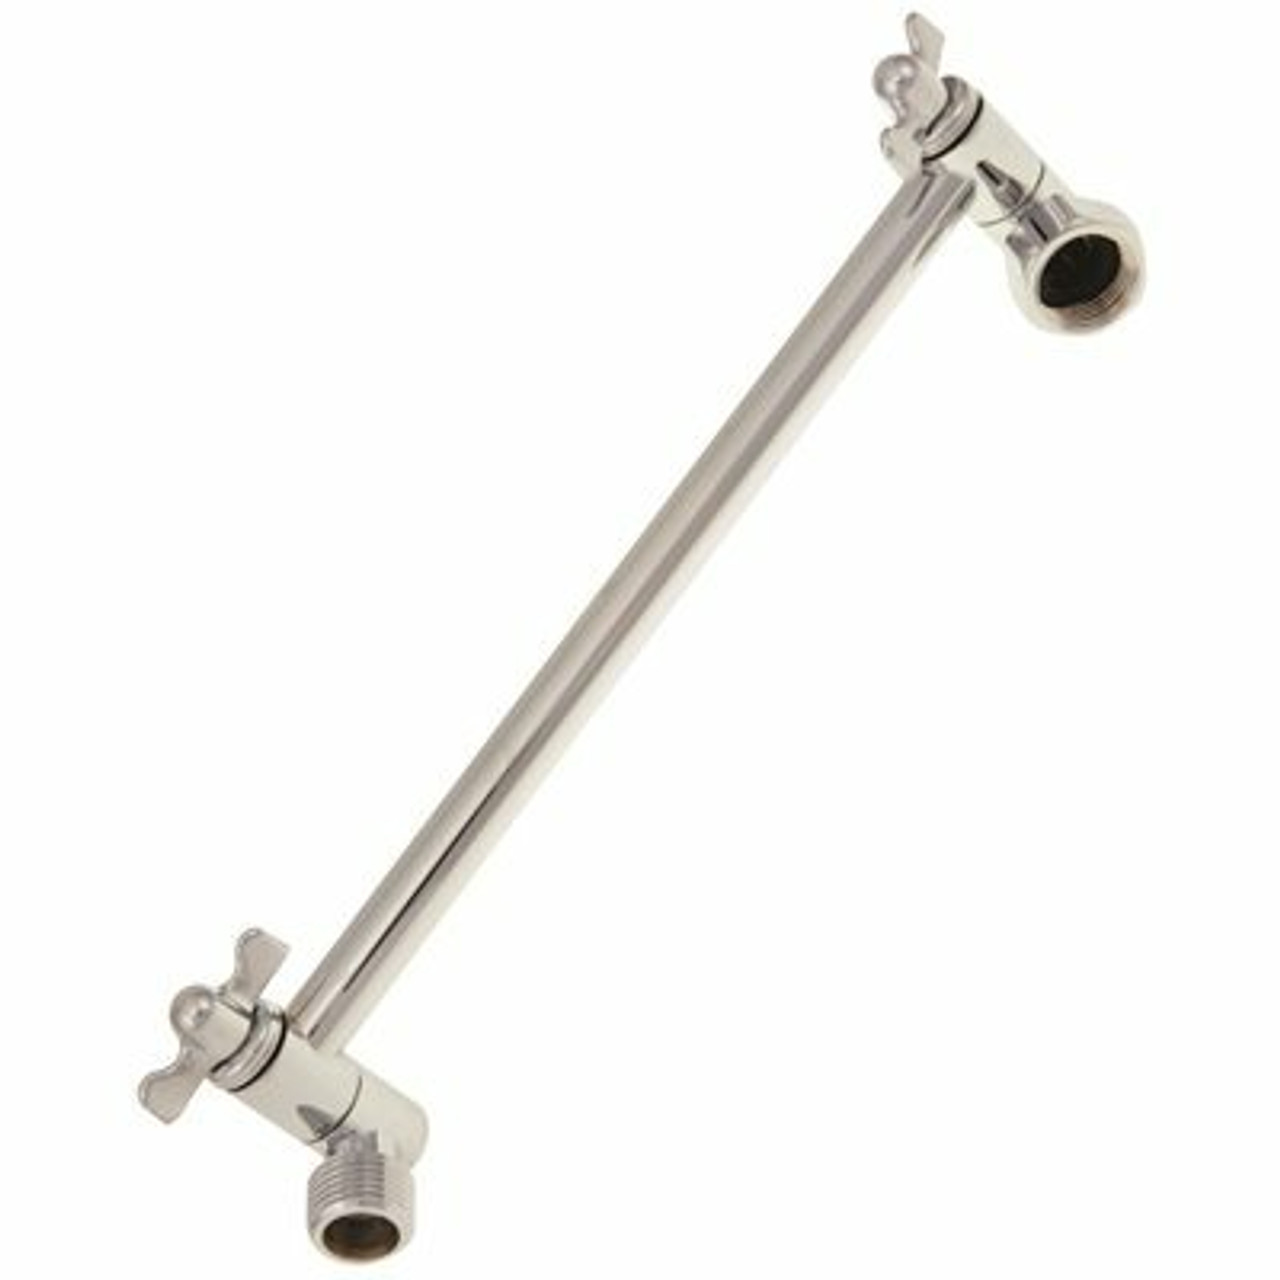 Proplus 1/2 In. Ips X 10 In. Adjustable Shower Arm, Chrome